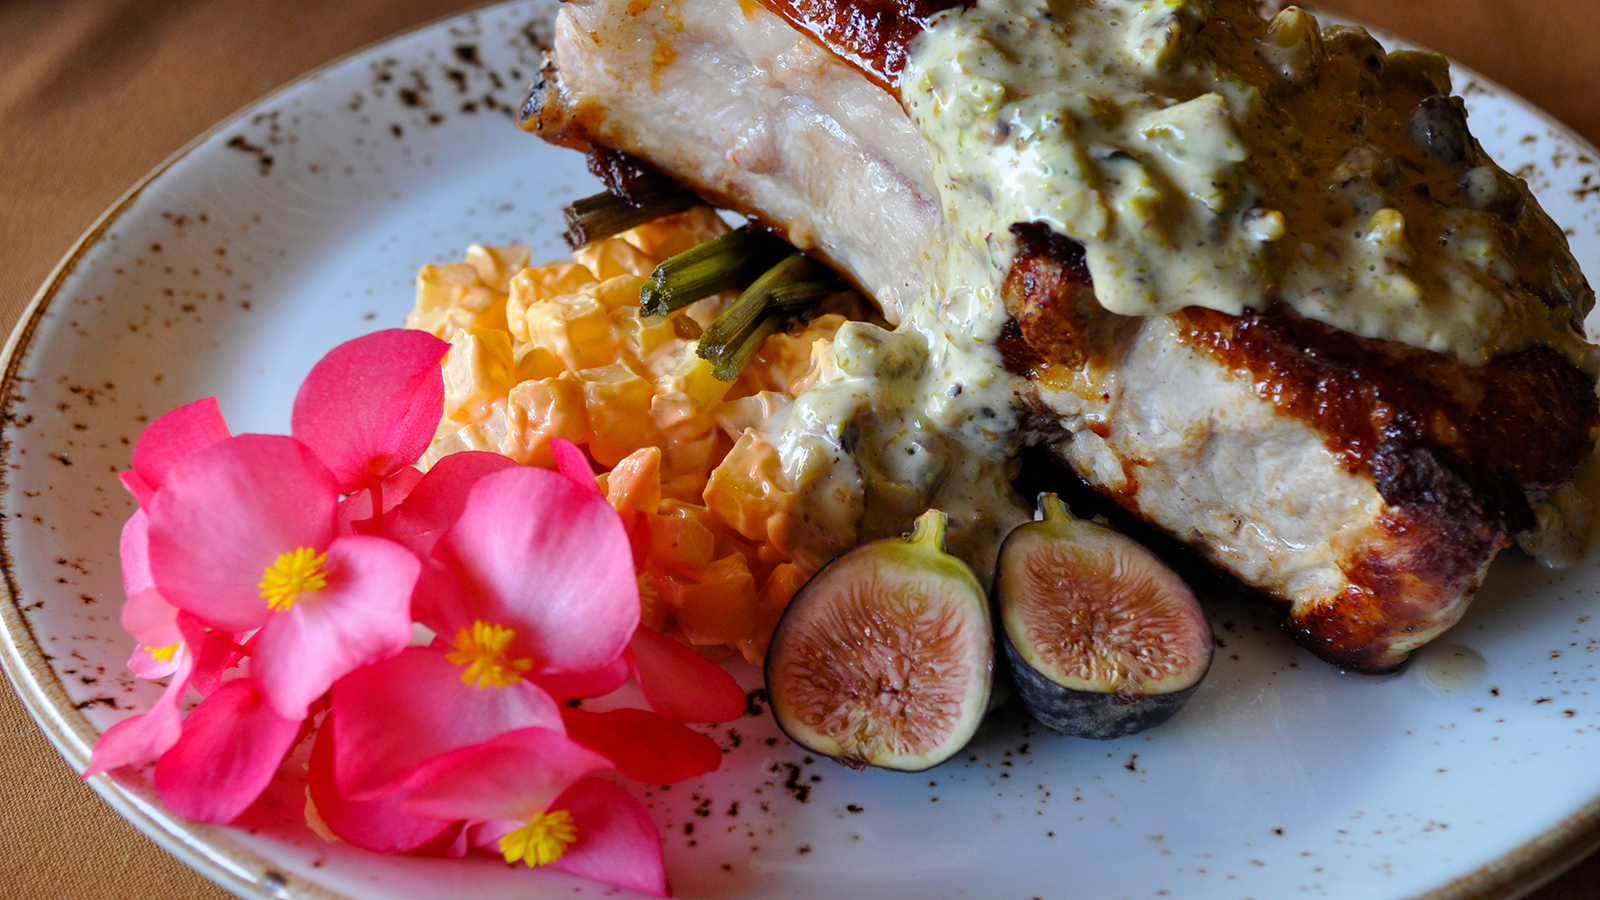 Taste locally sourced ingredients at The Settlers Inn Restaurant.